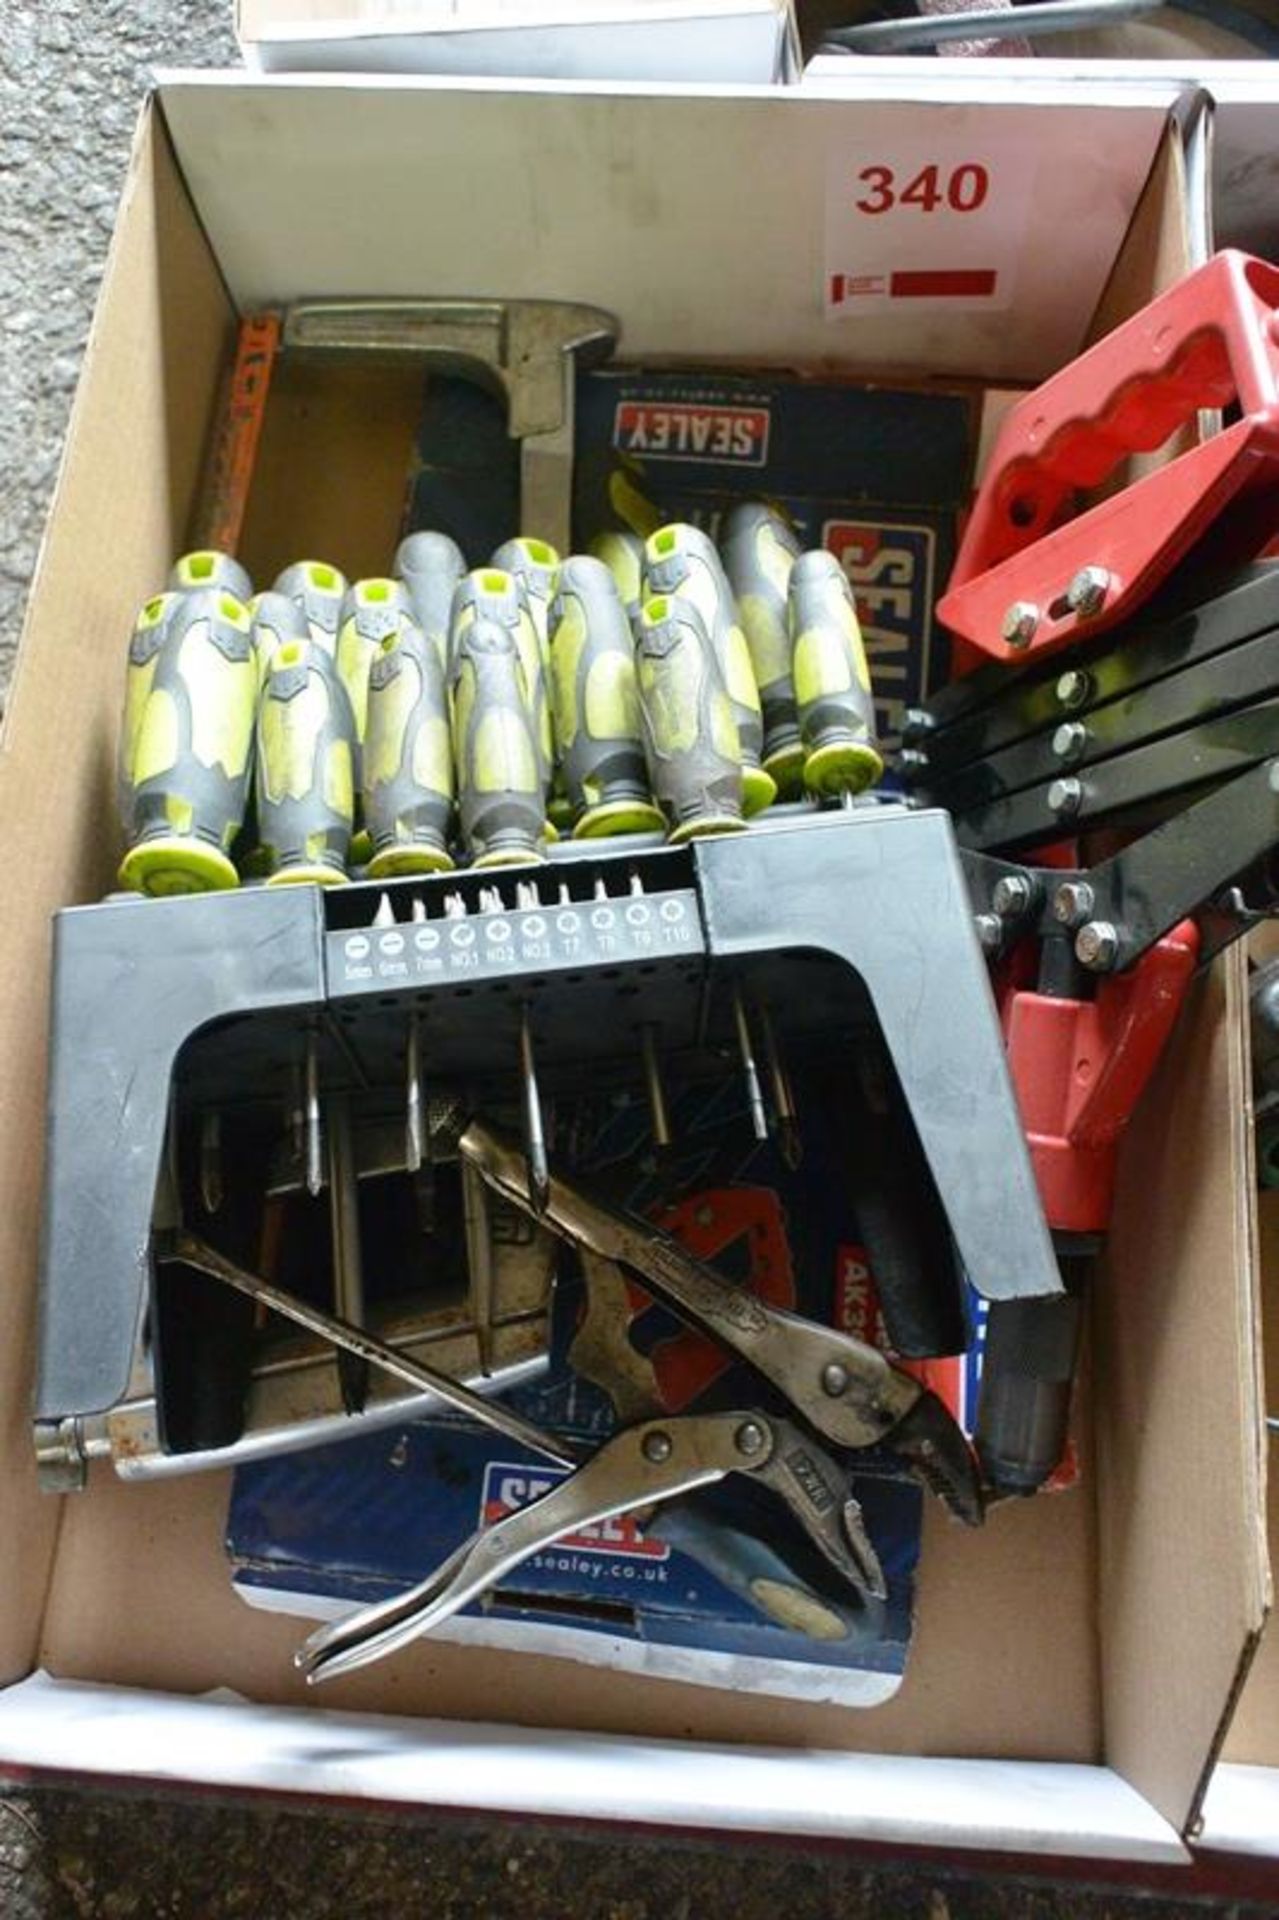 Assorted hand tools (Recommended collection period for this lot Wednesday 15th - Friday 17th